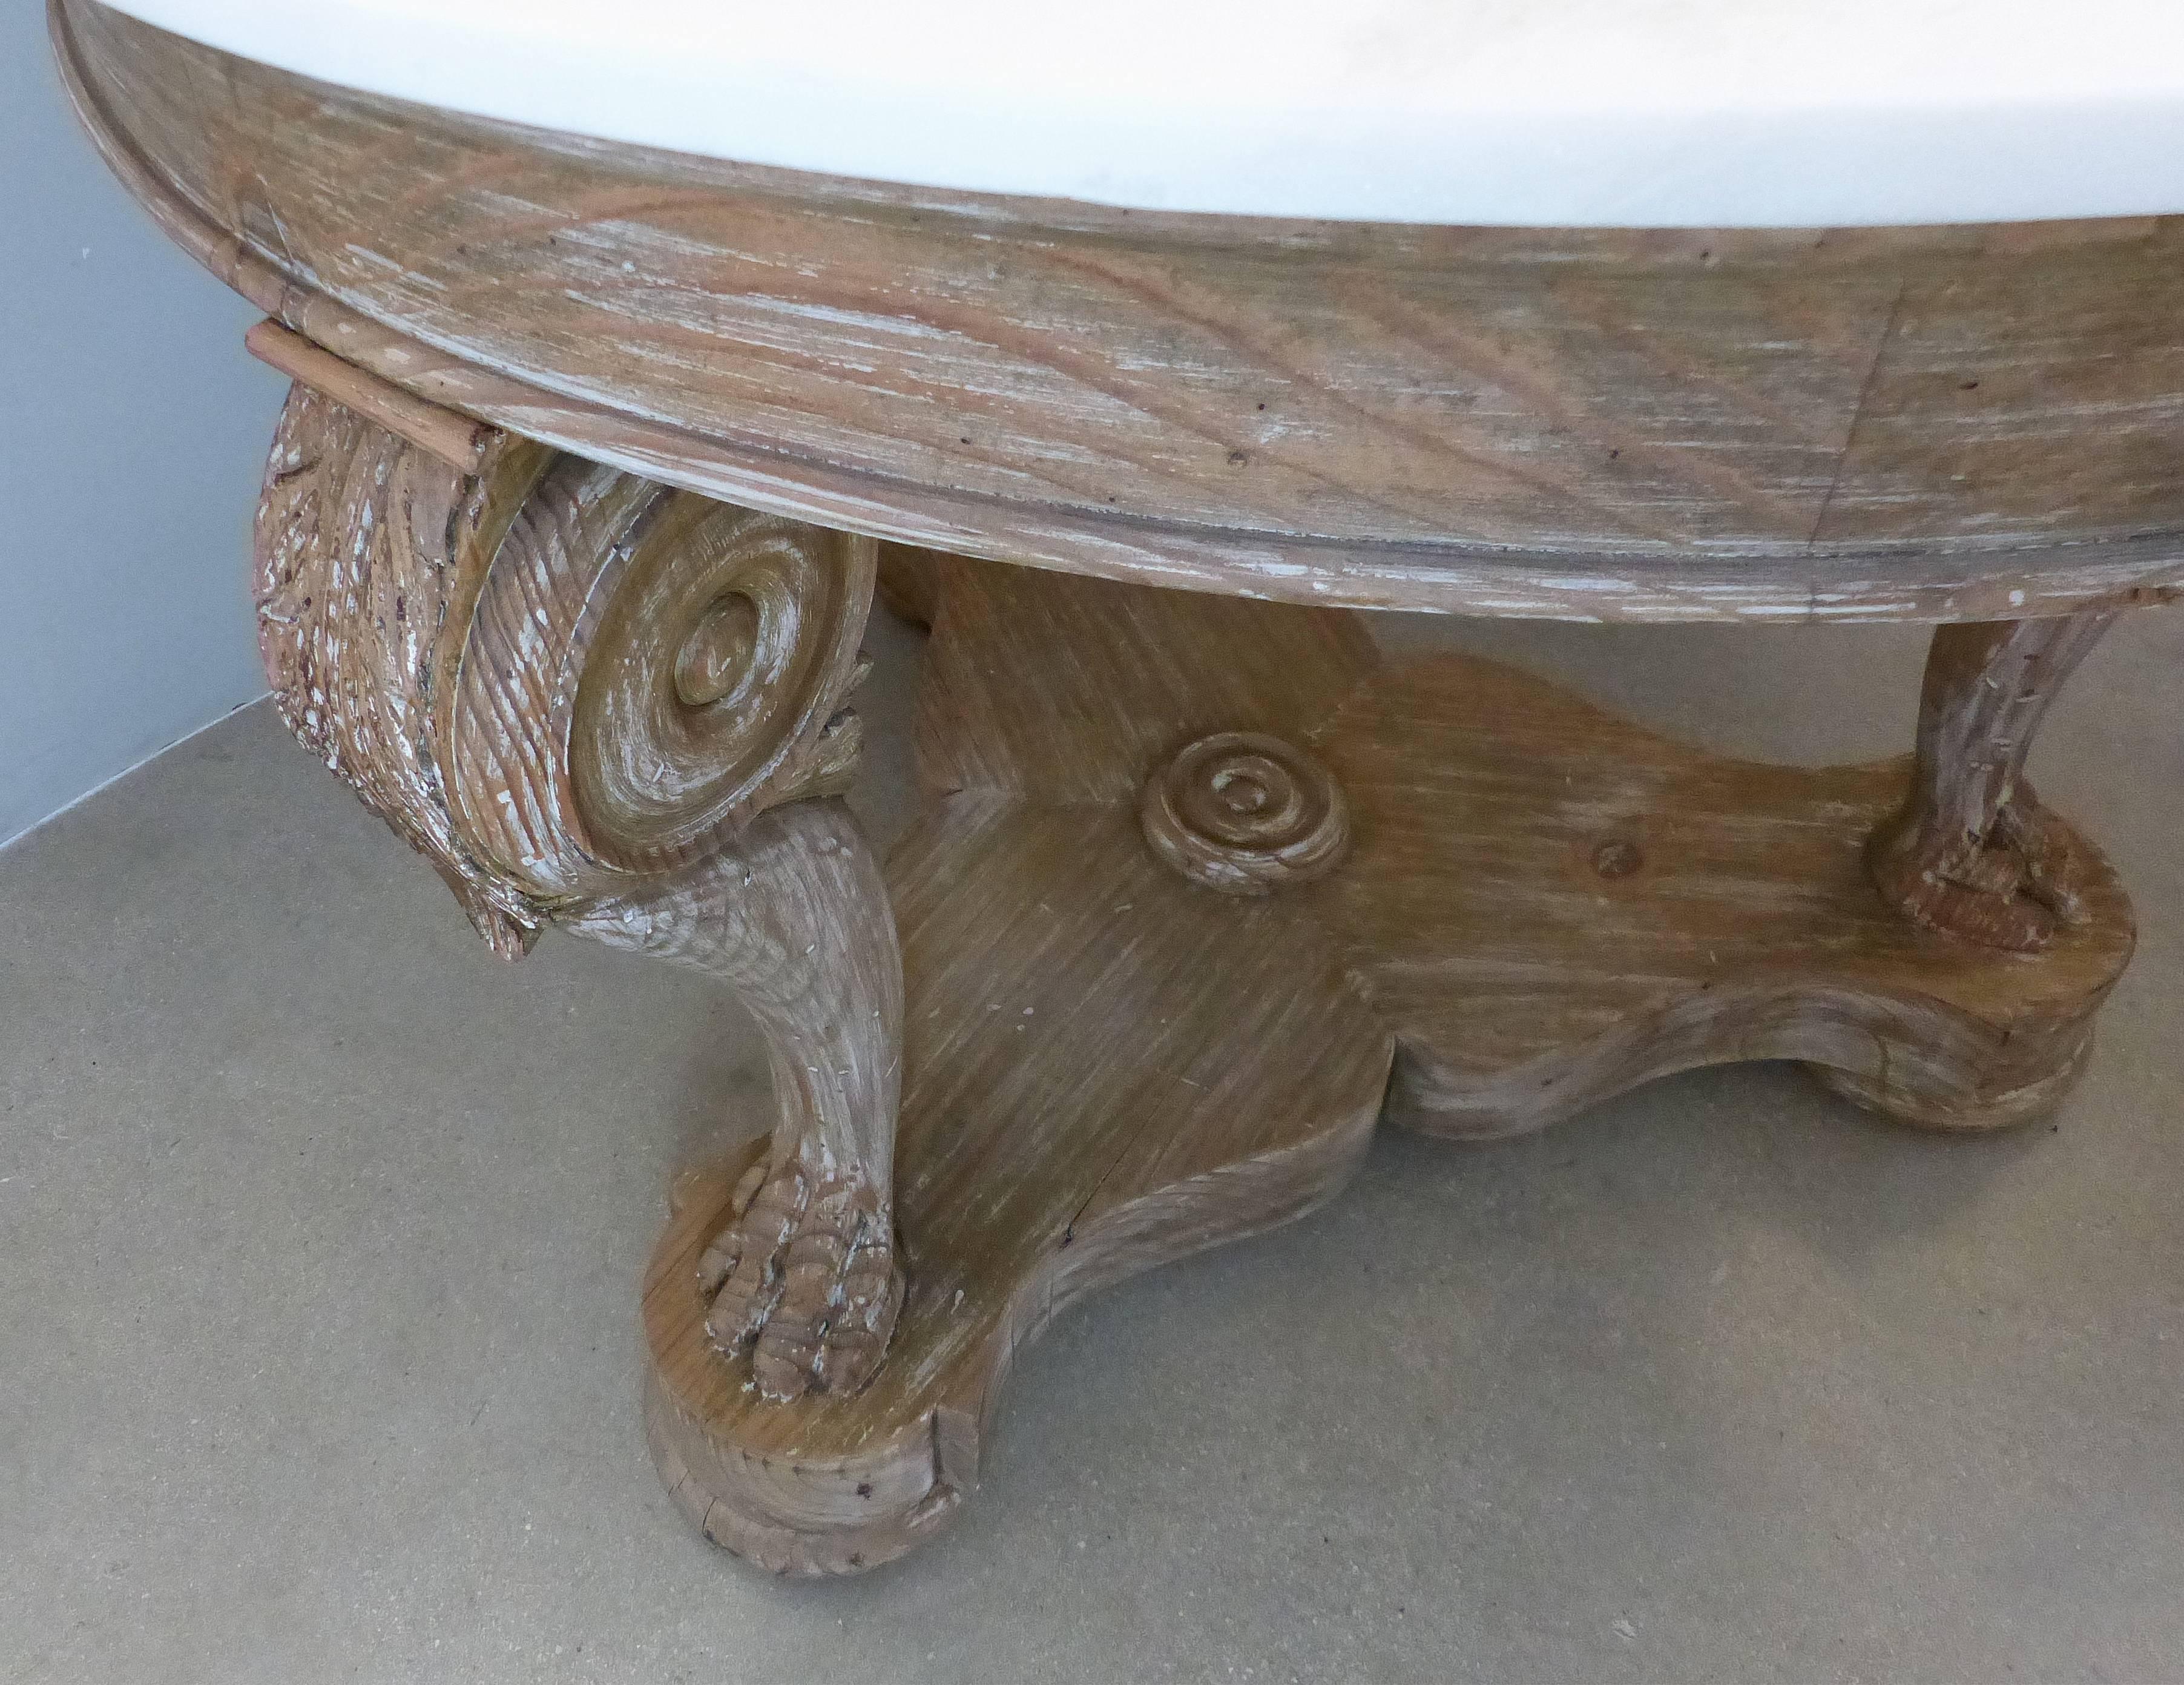 Baroque Revival William Switzer 'Vancouver, B.C. Hand-Crafted Marbletop Center Table